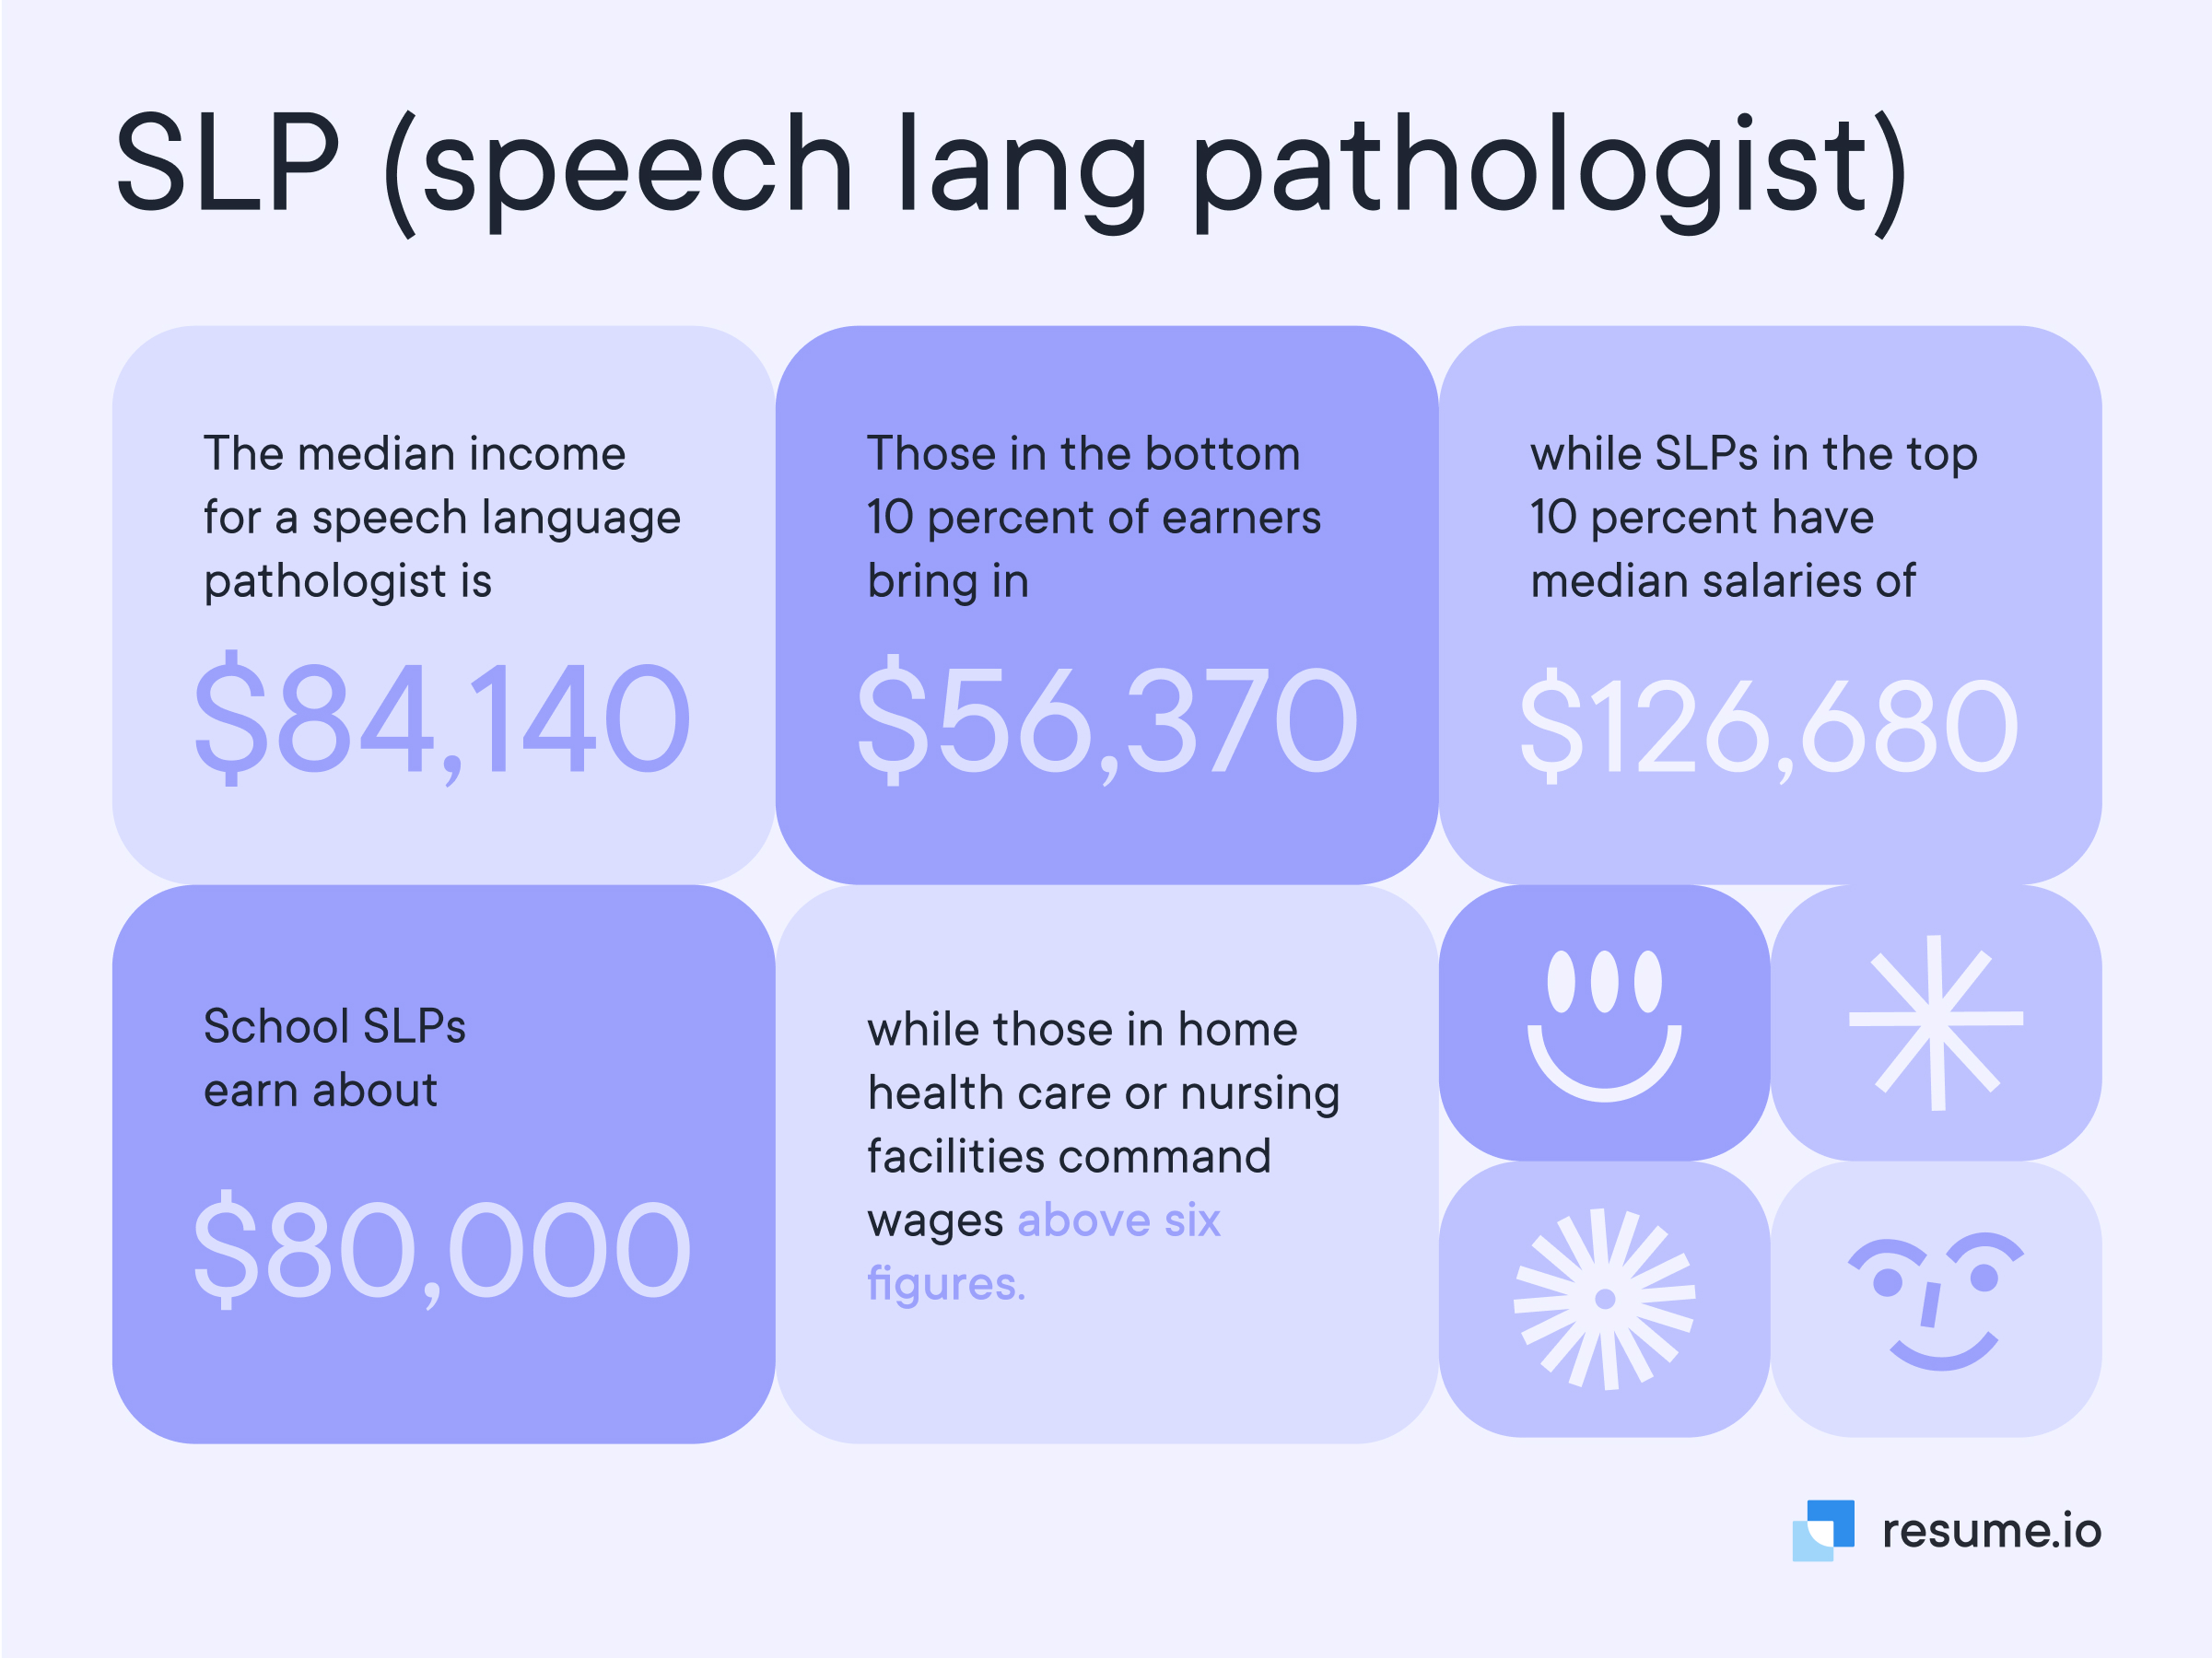 Financial facts about SLP